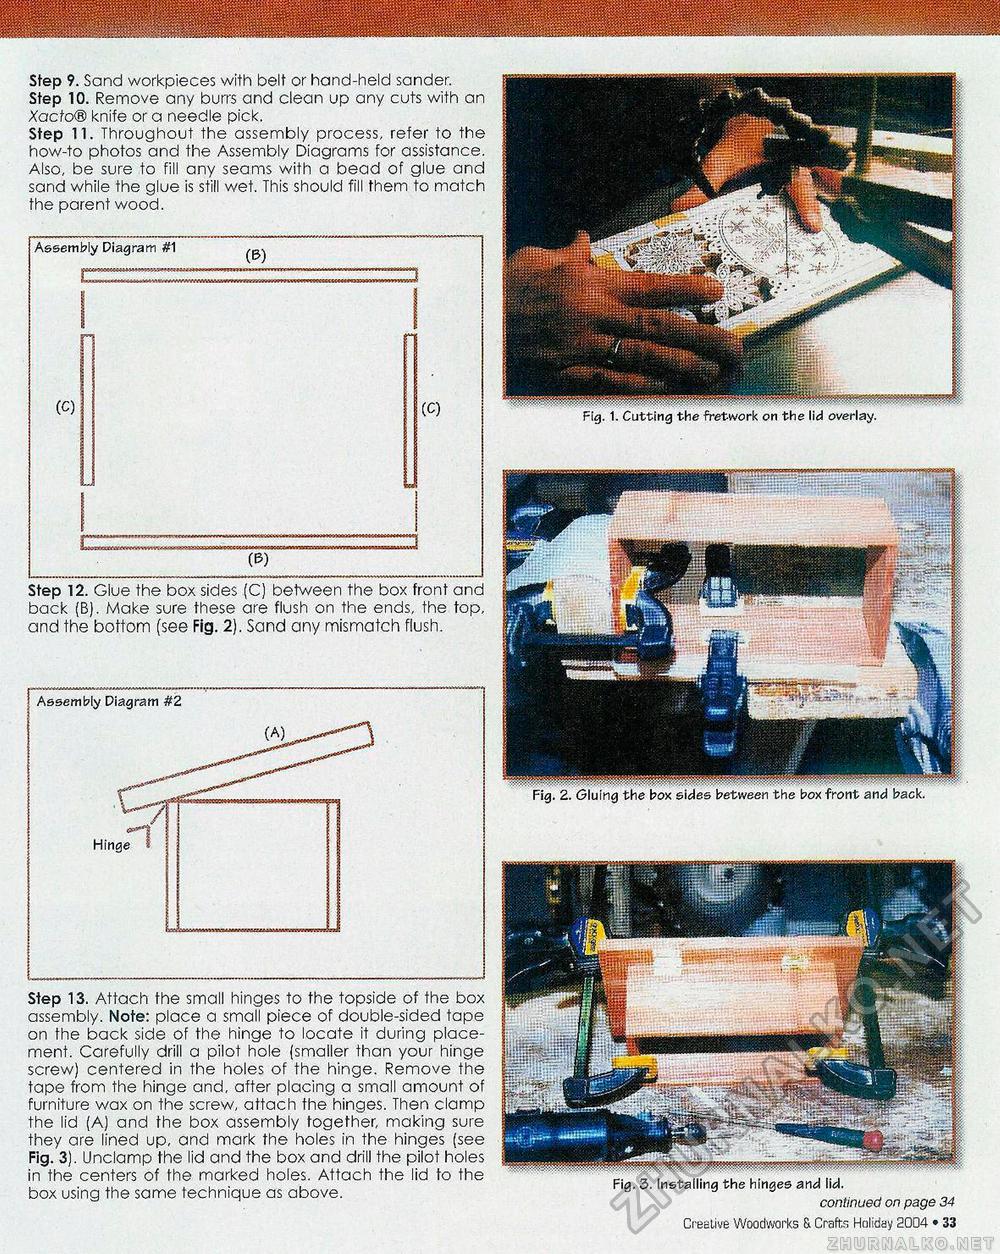 Creative Woodworks  & crafts-103-2004-Holiday,  33